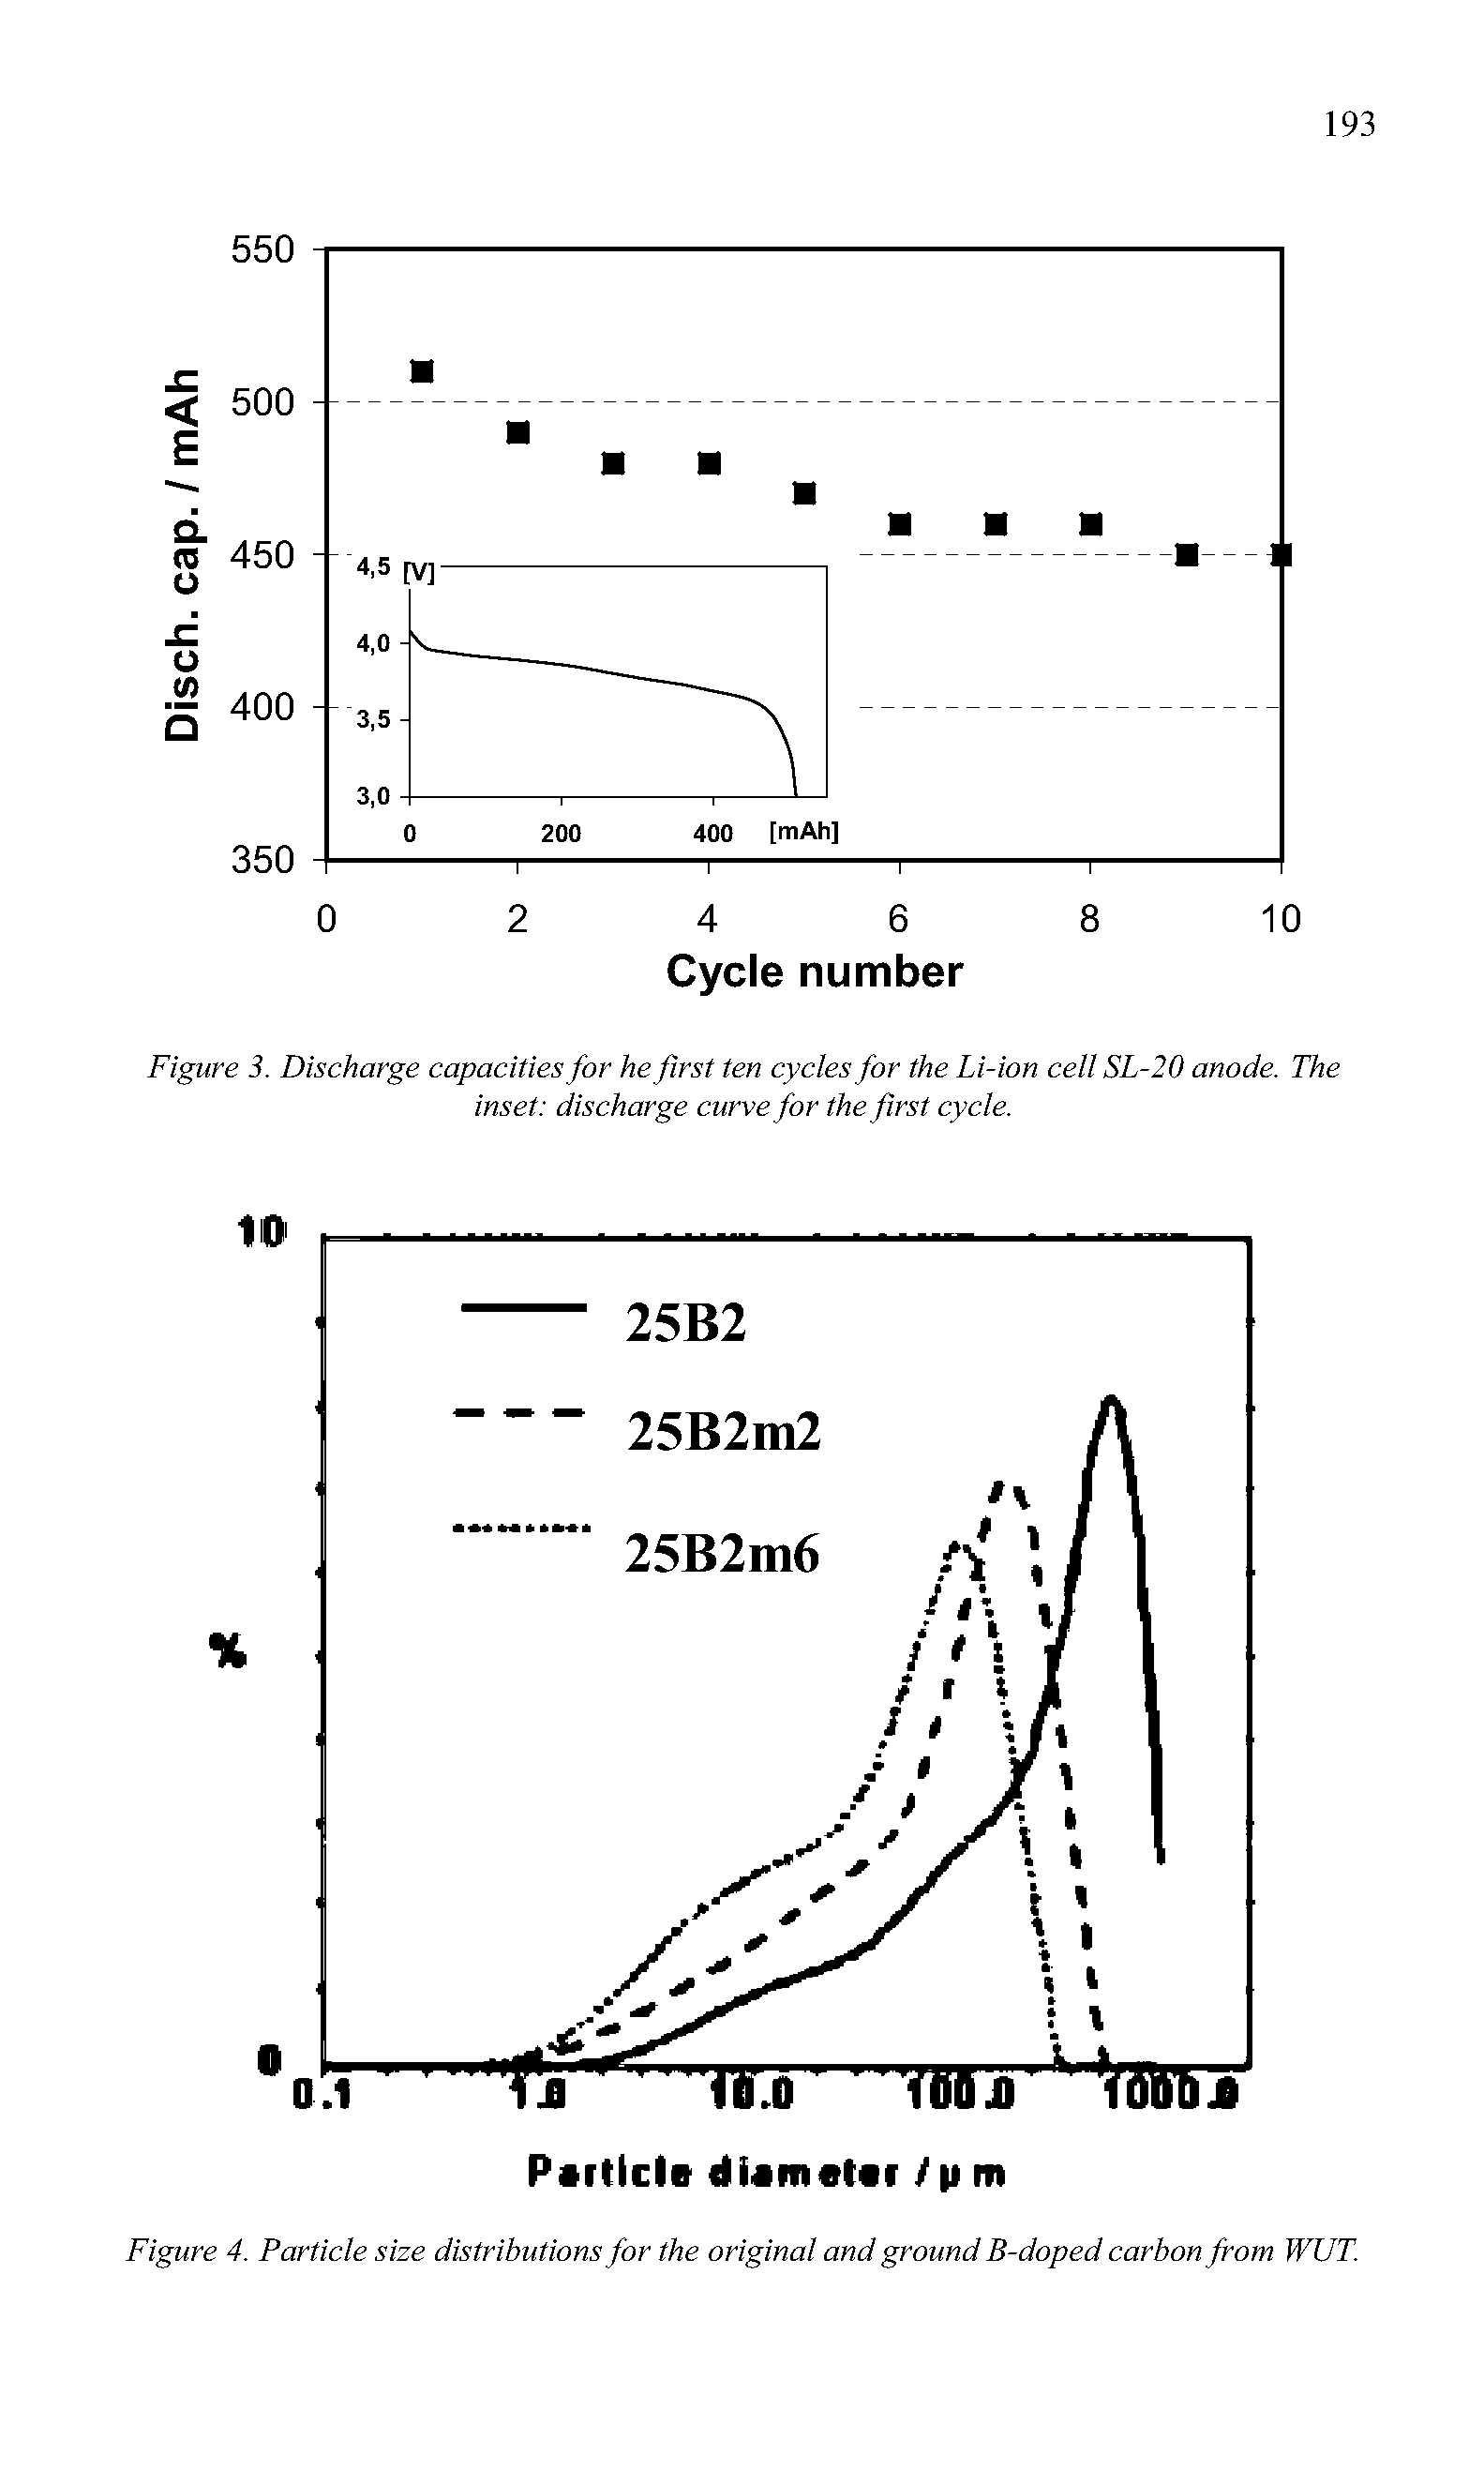 Figure 3. Discharge capacities for he first ten cycles for the Li-ion cell SL-20 anode. The inset discharge curve for the first cycle.